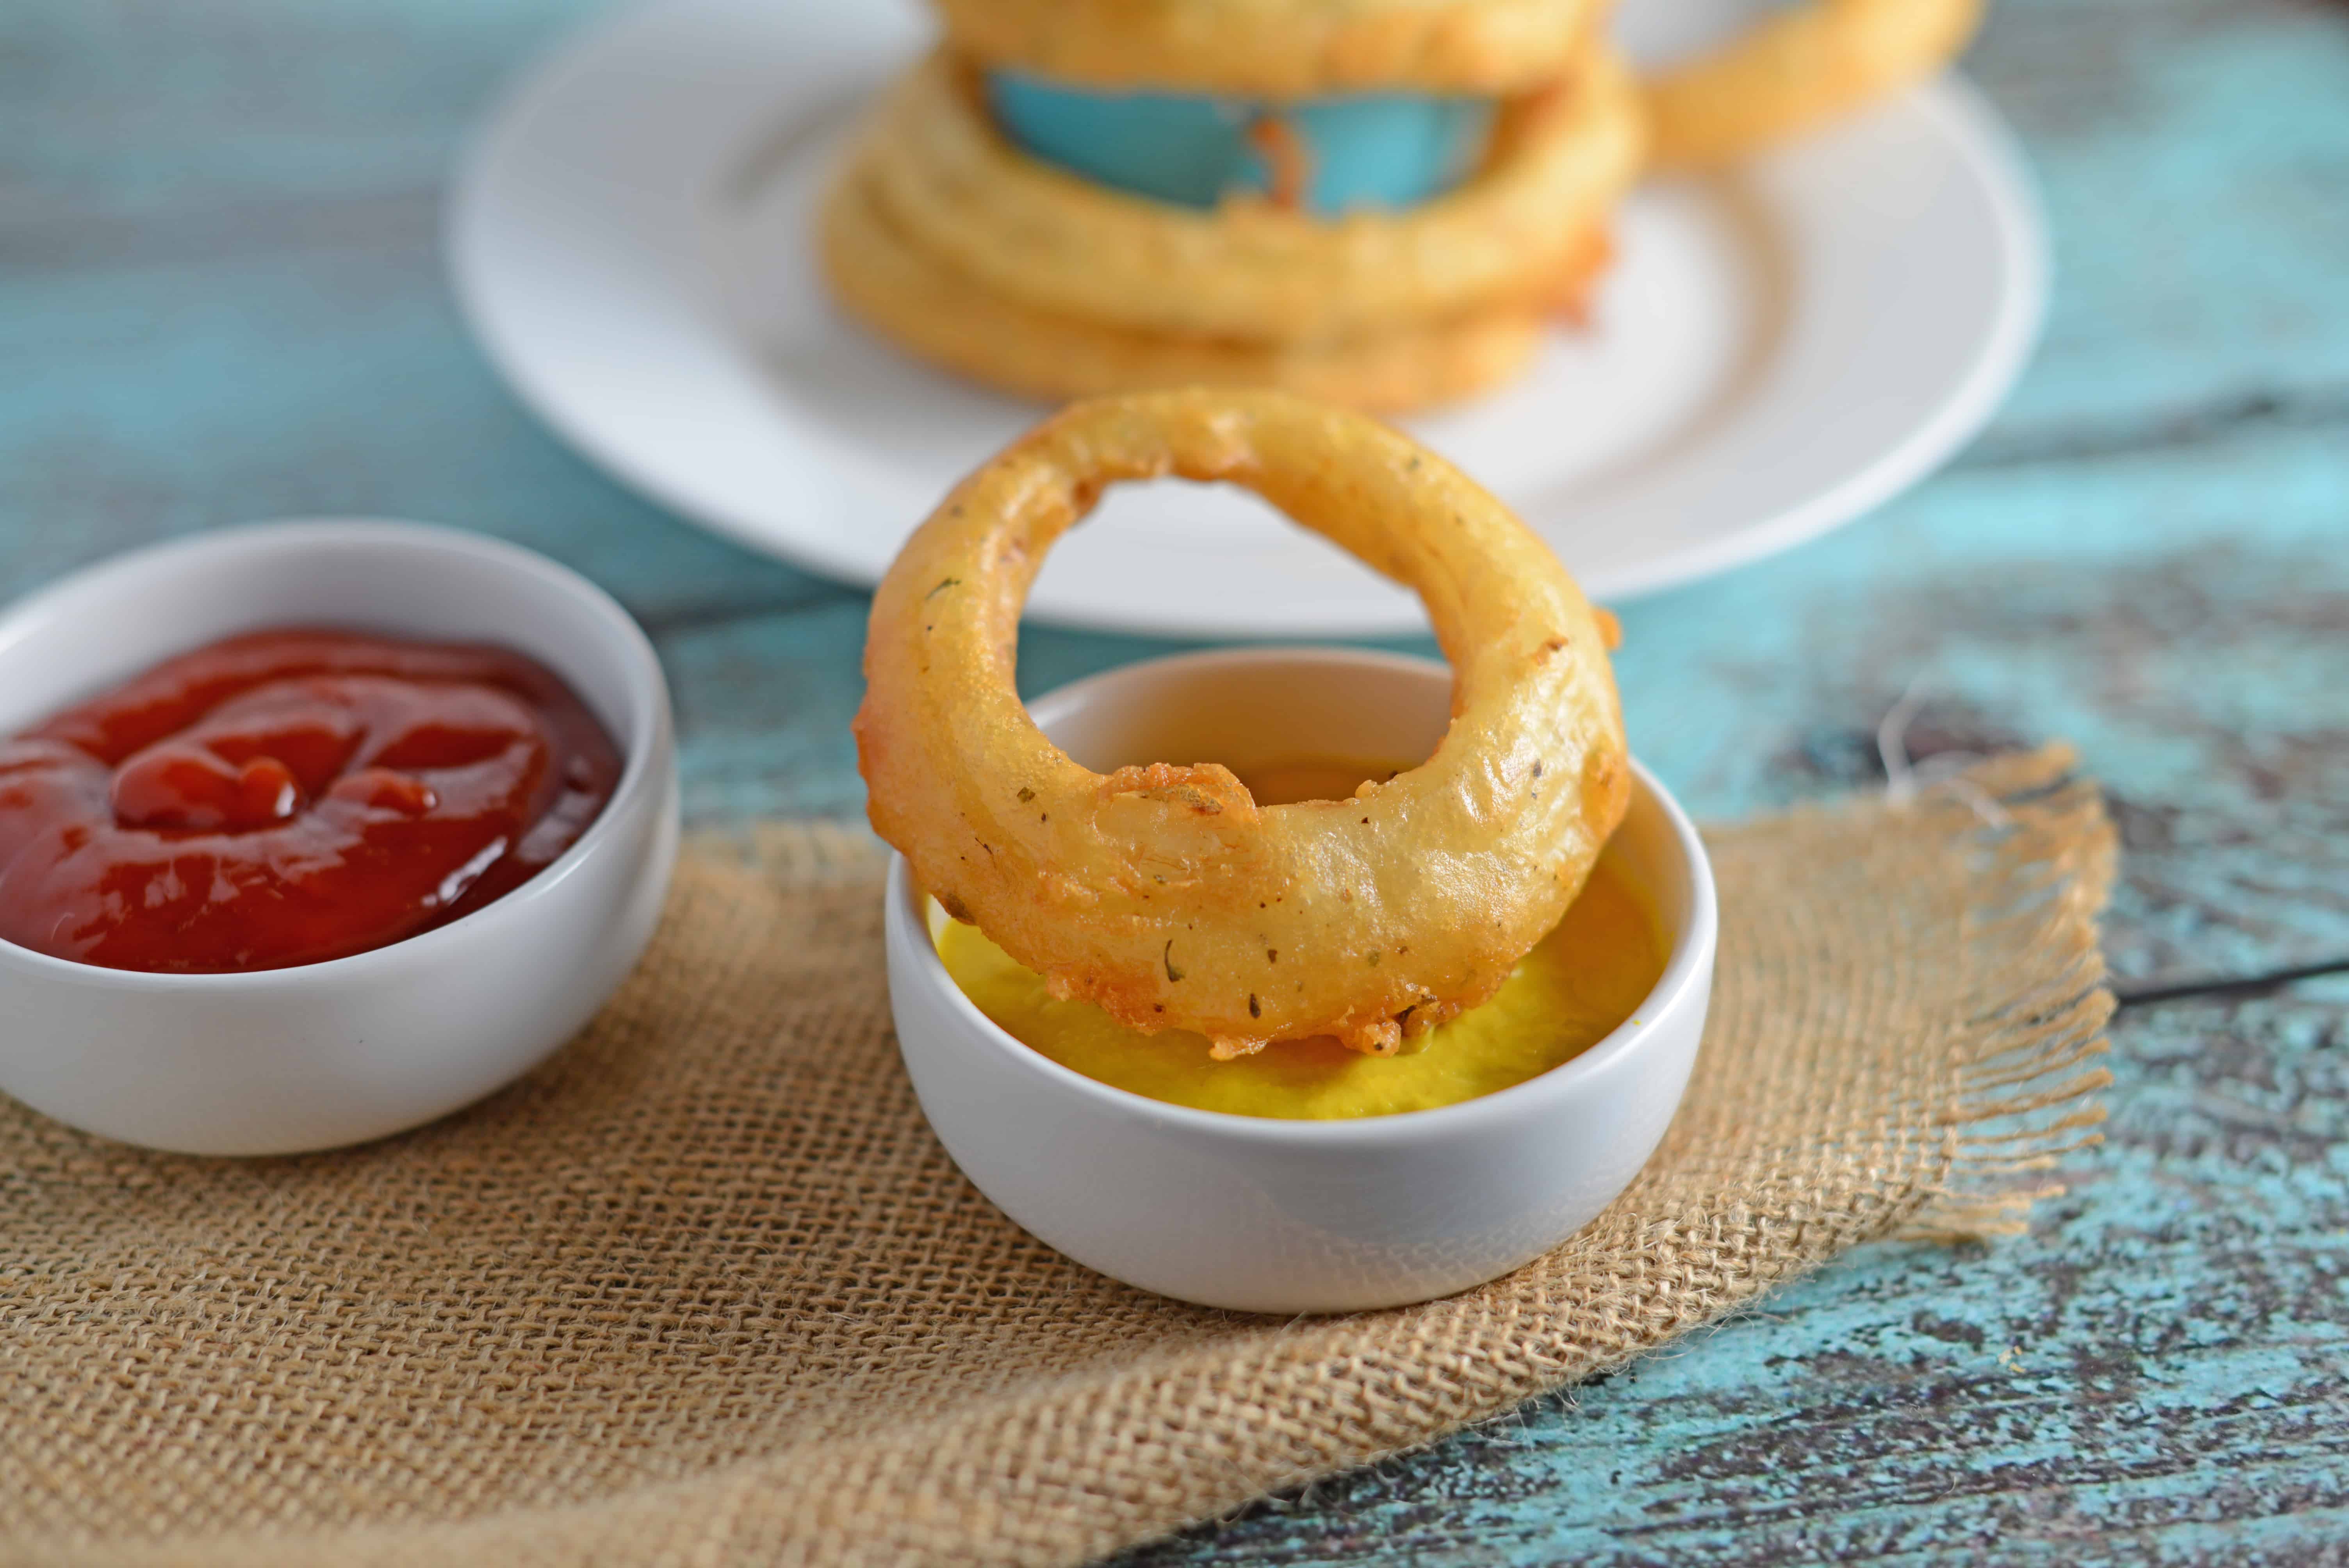 Beer Battered Onion Rings Recipe - Crunchy and crispy homemade beer battered onion rings. Dip in a spicy chipotle remoulade or eat alone. www.savoryexperiments.com